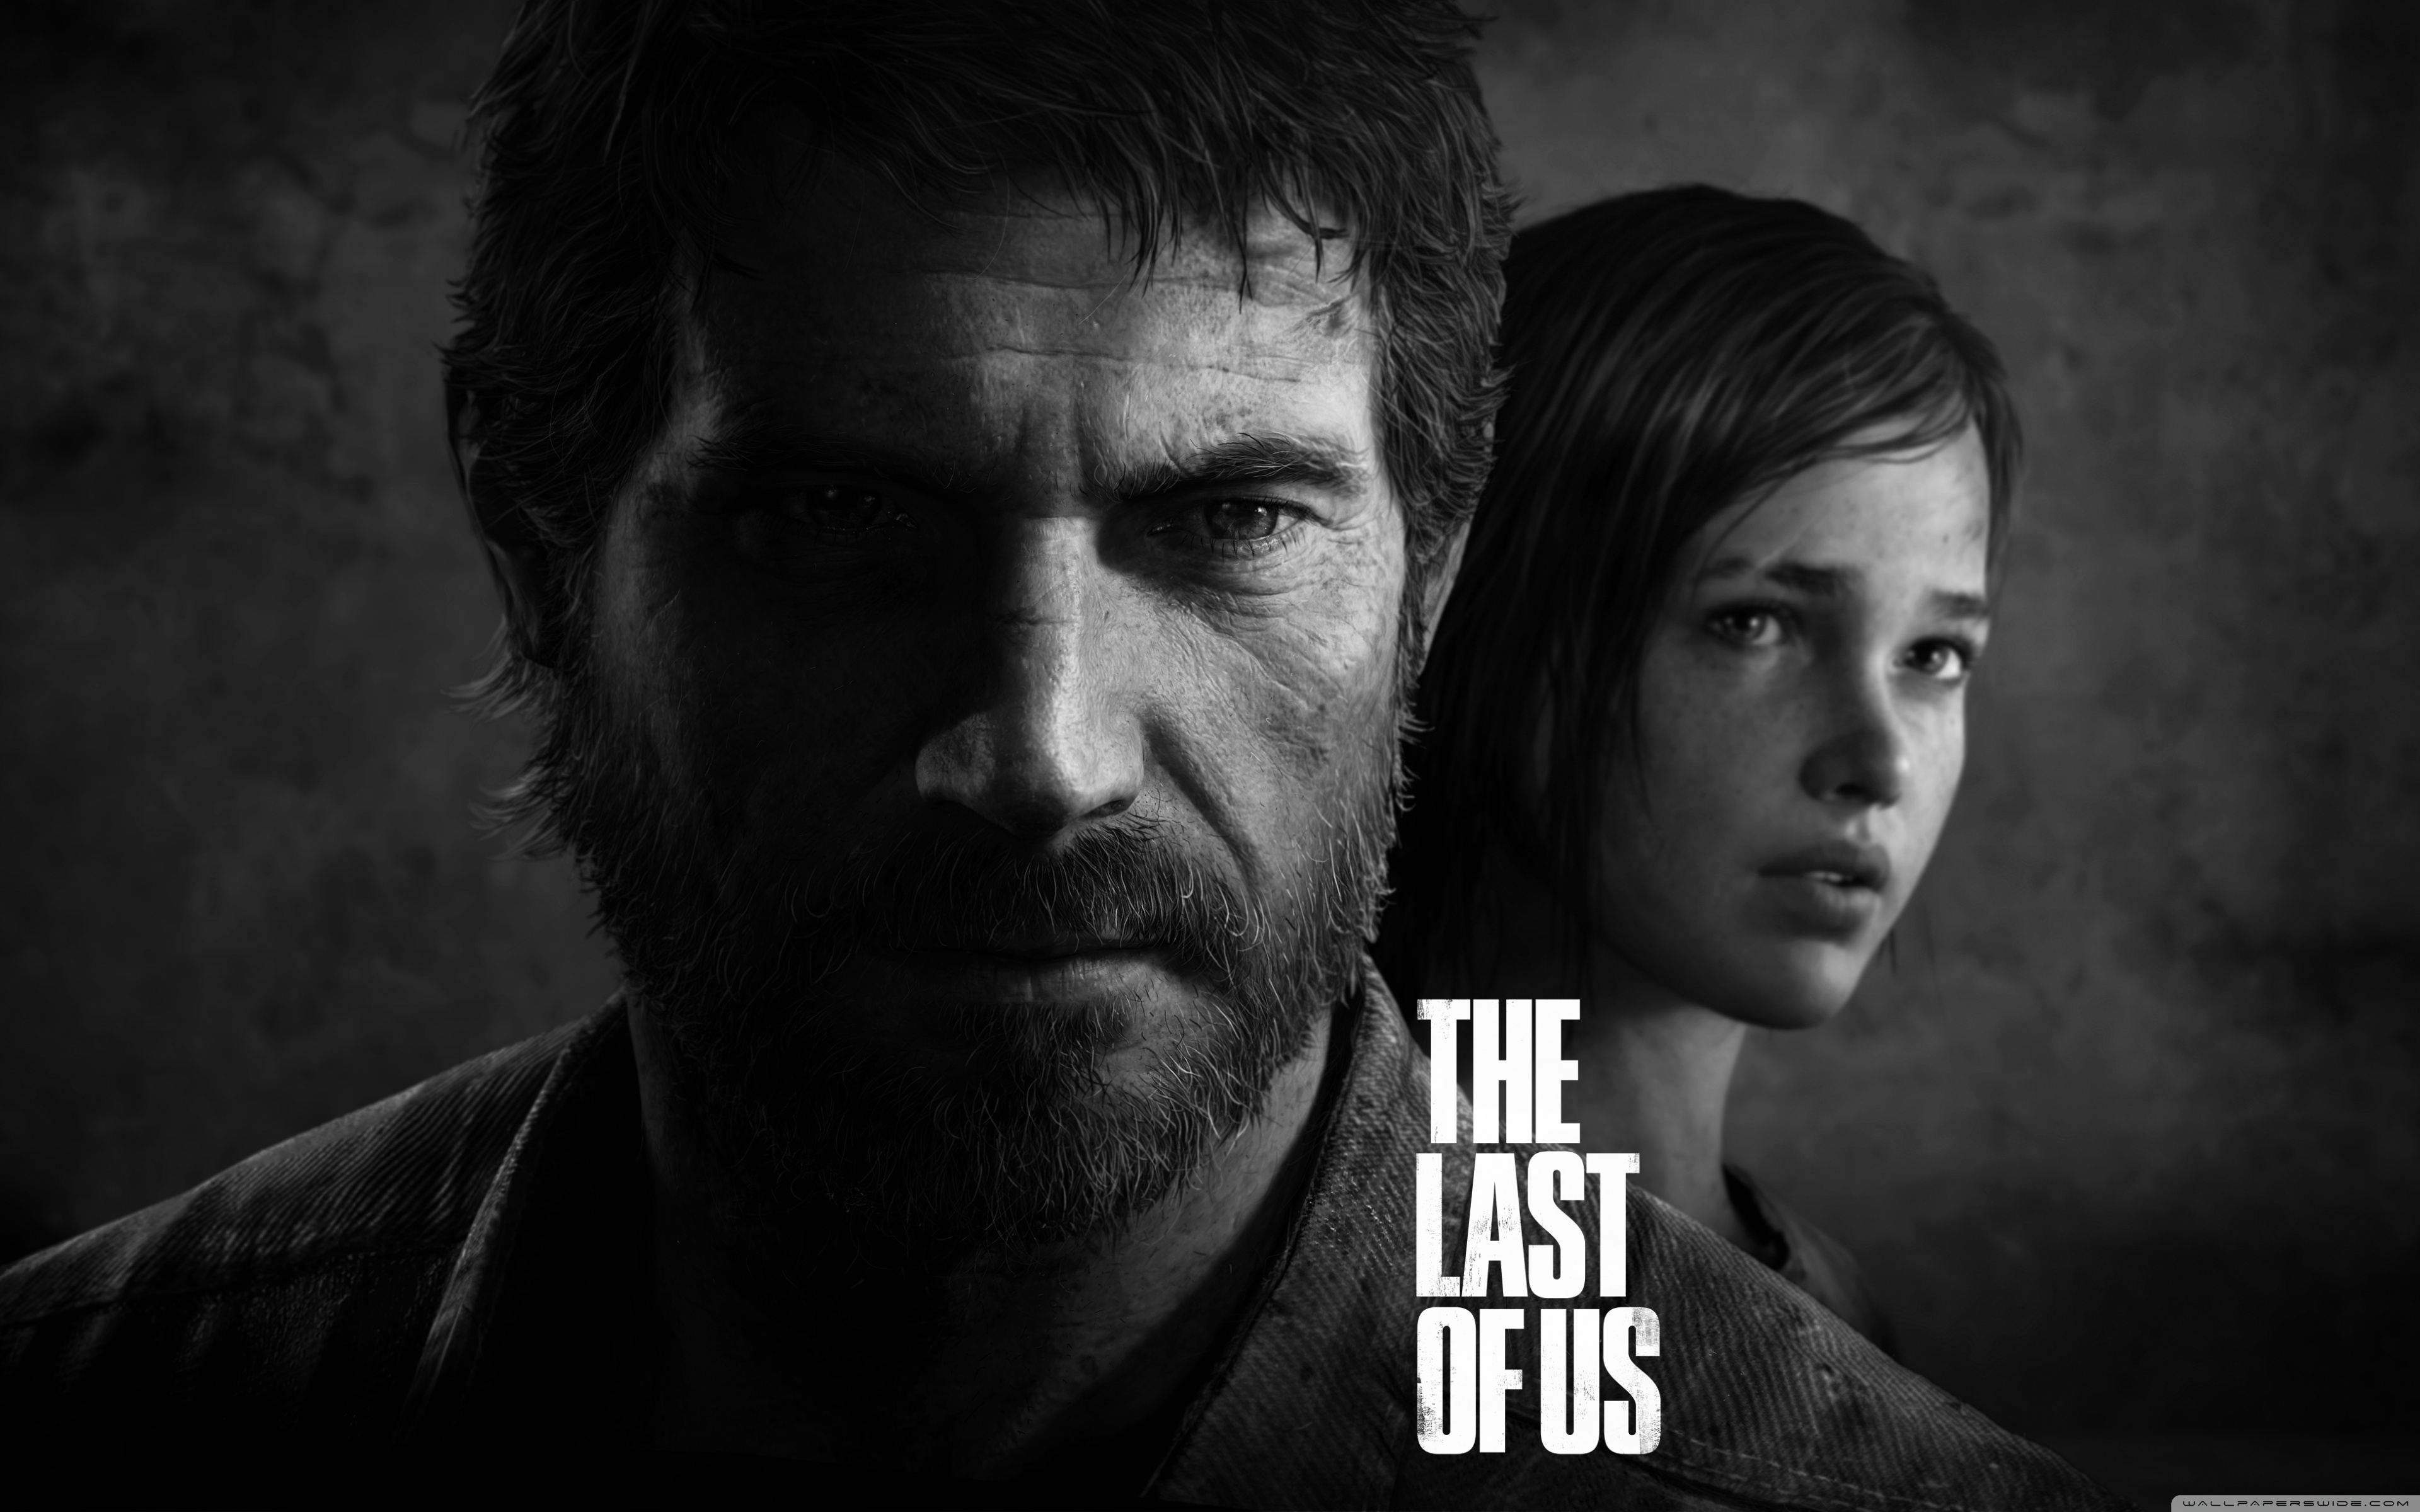 Зе ласт оф 2 дата выхода. Джоэл the last of us. Джоэл Миллер the last of us 2.